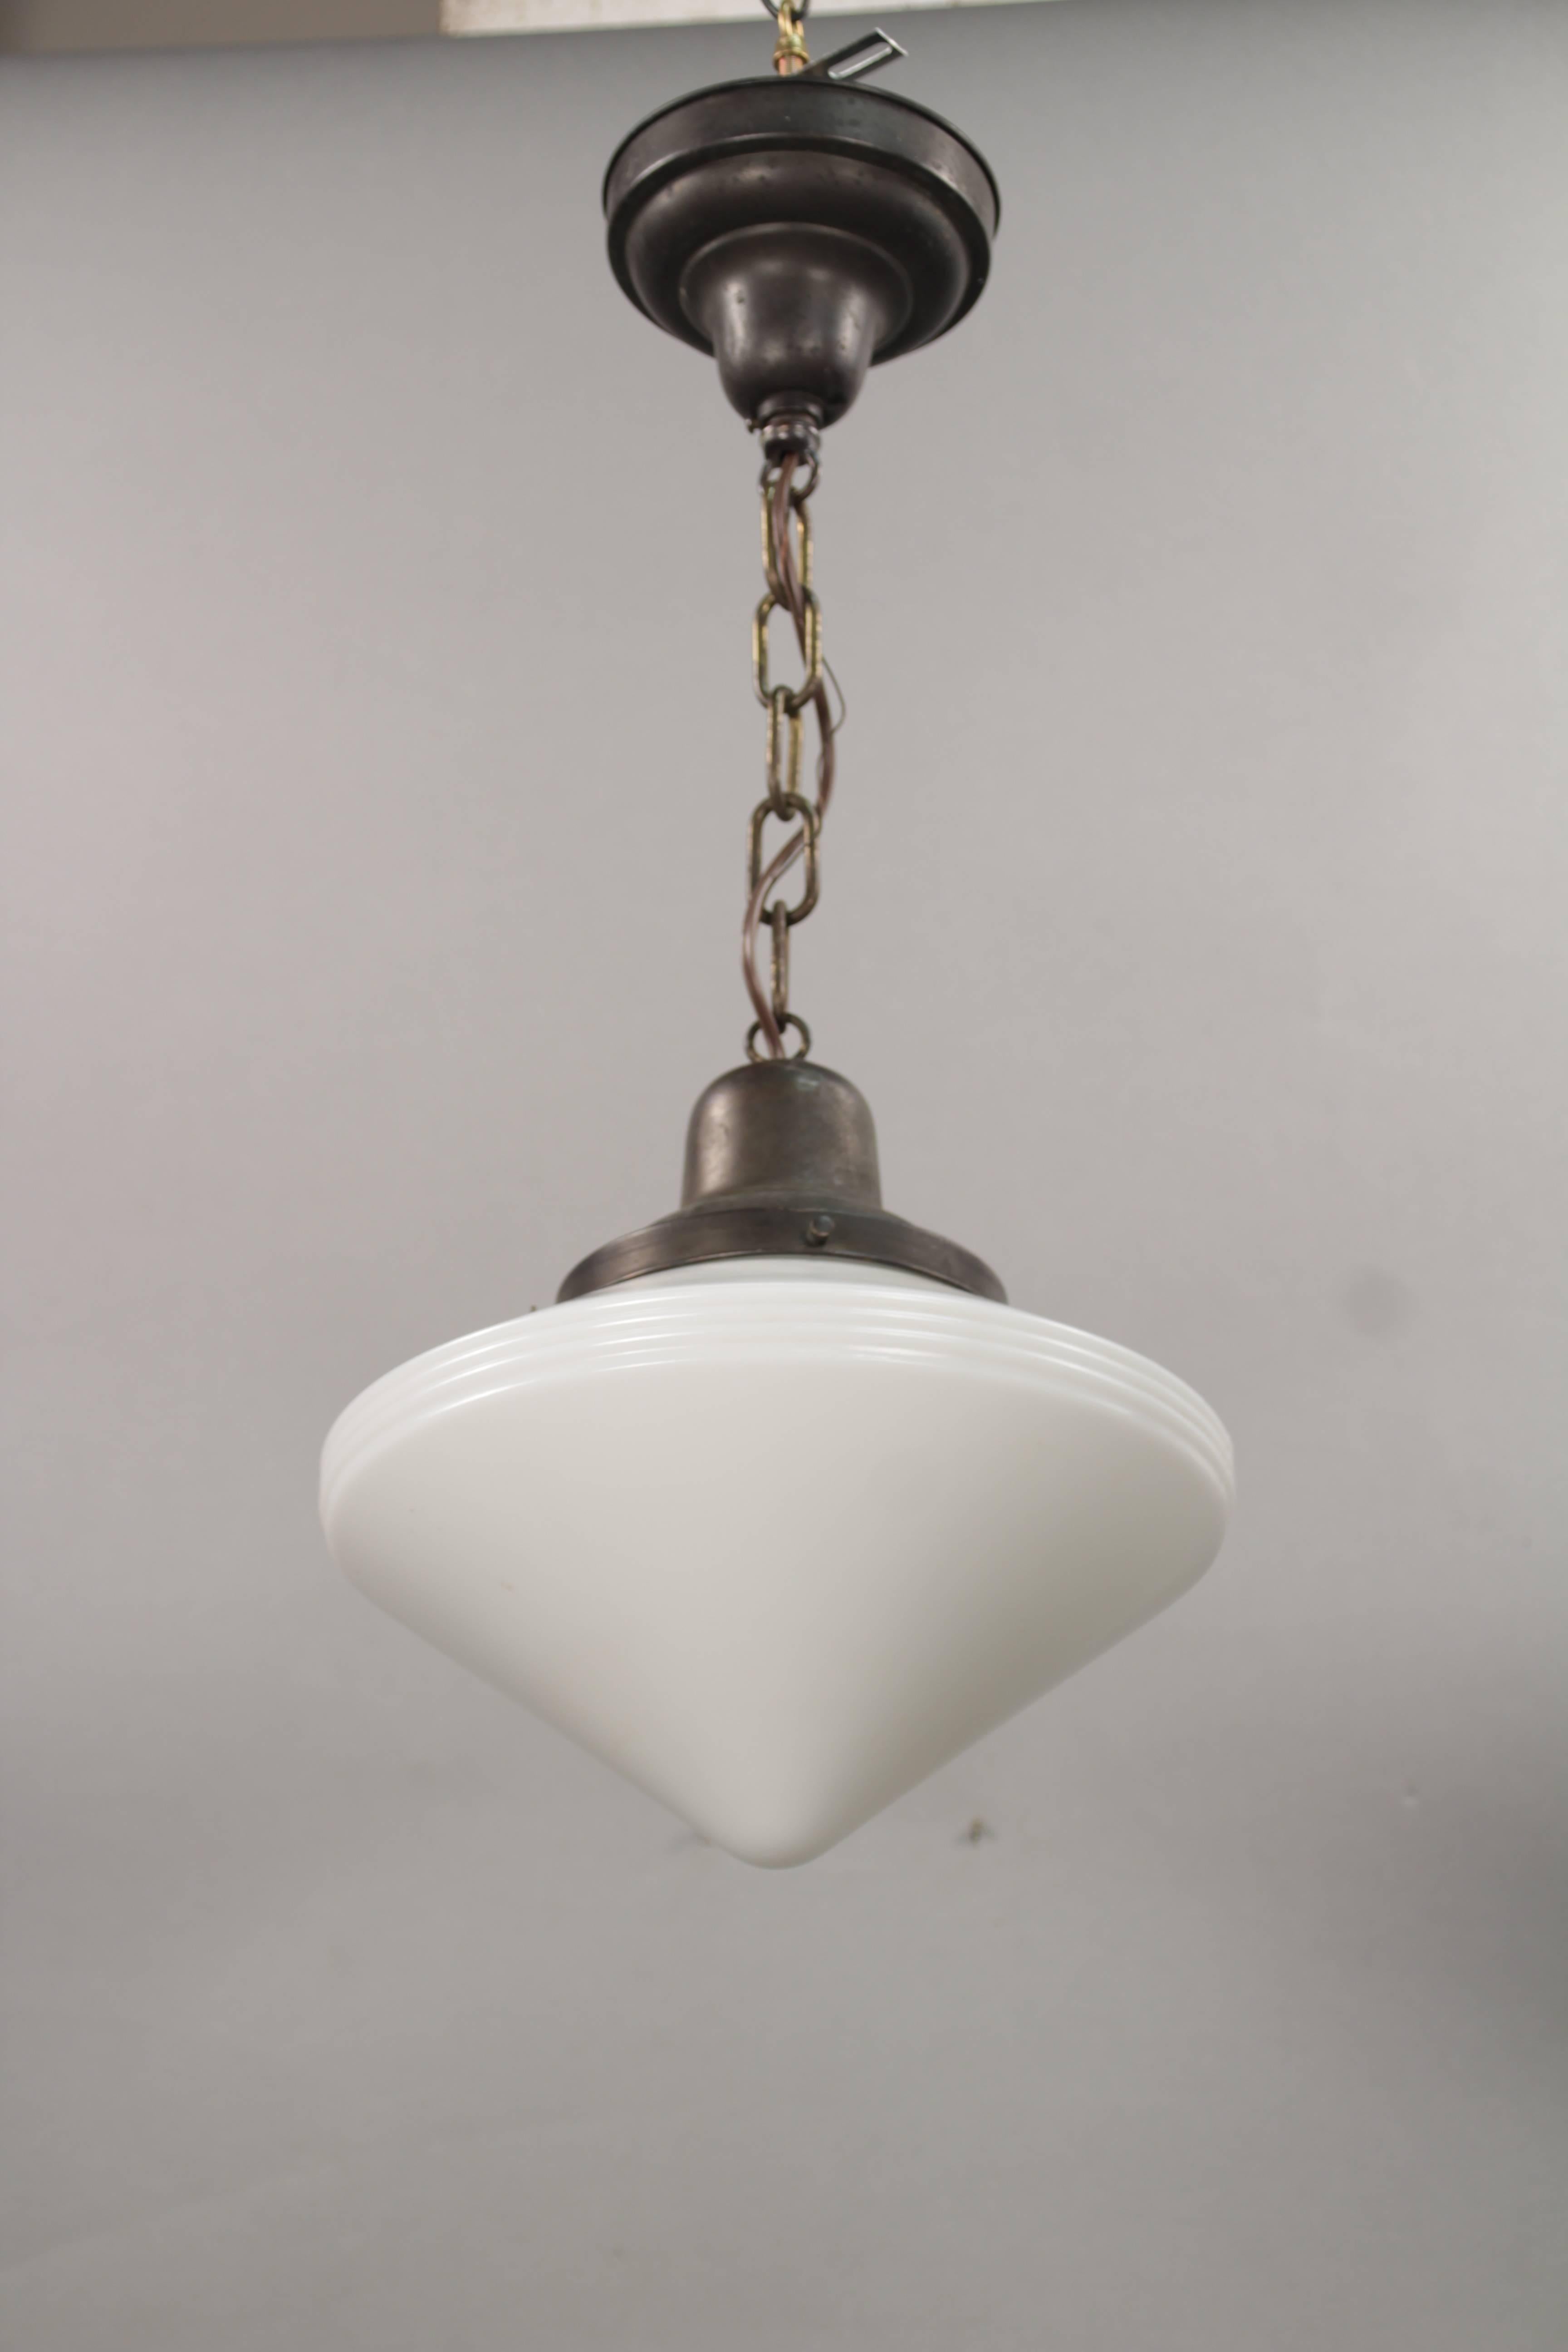 Nicely designed pendant with clean lines. Measure: 8.25